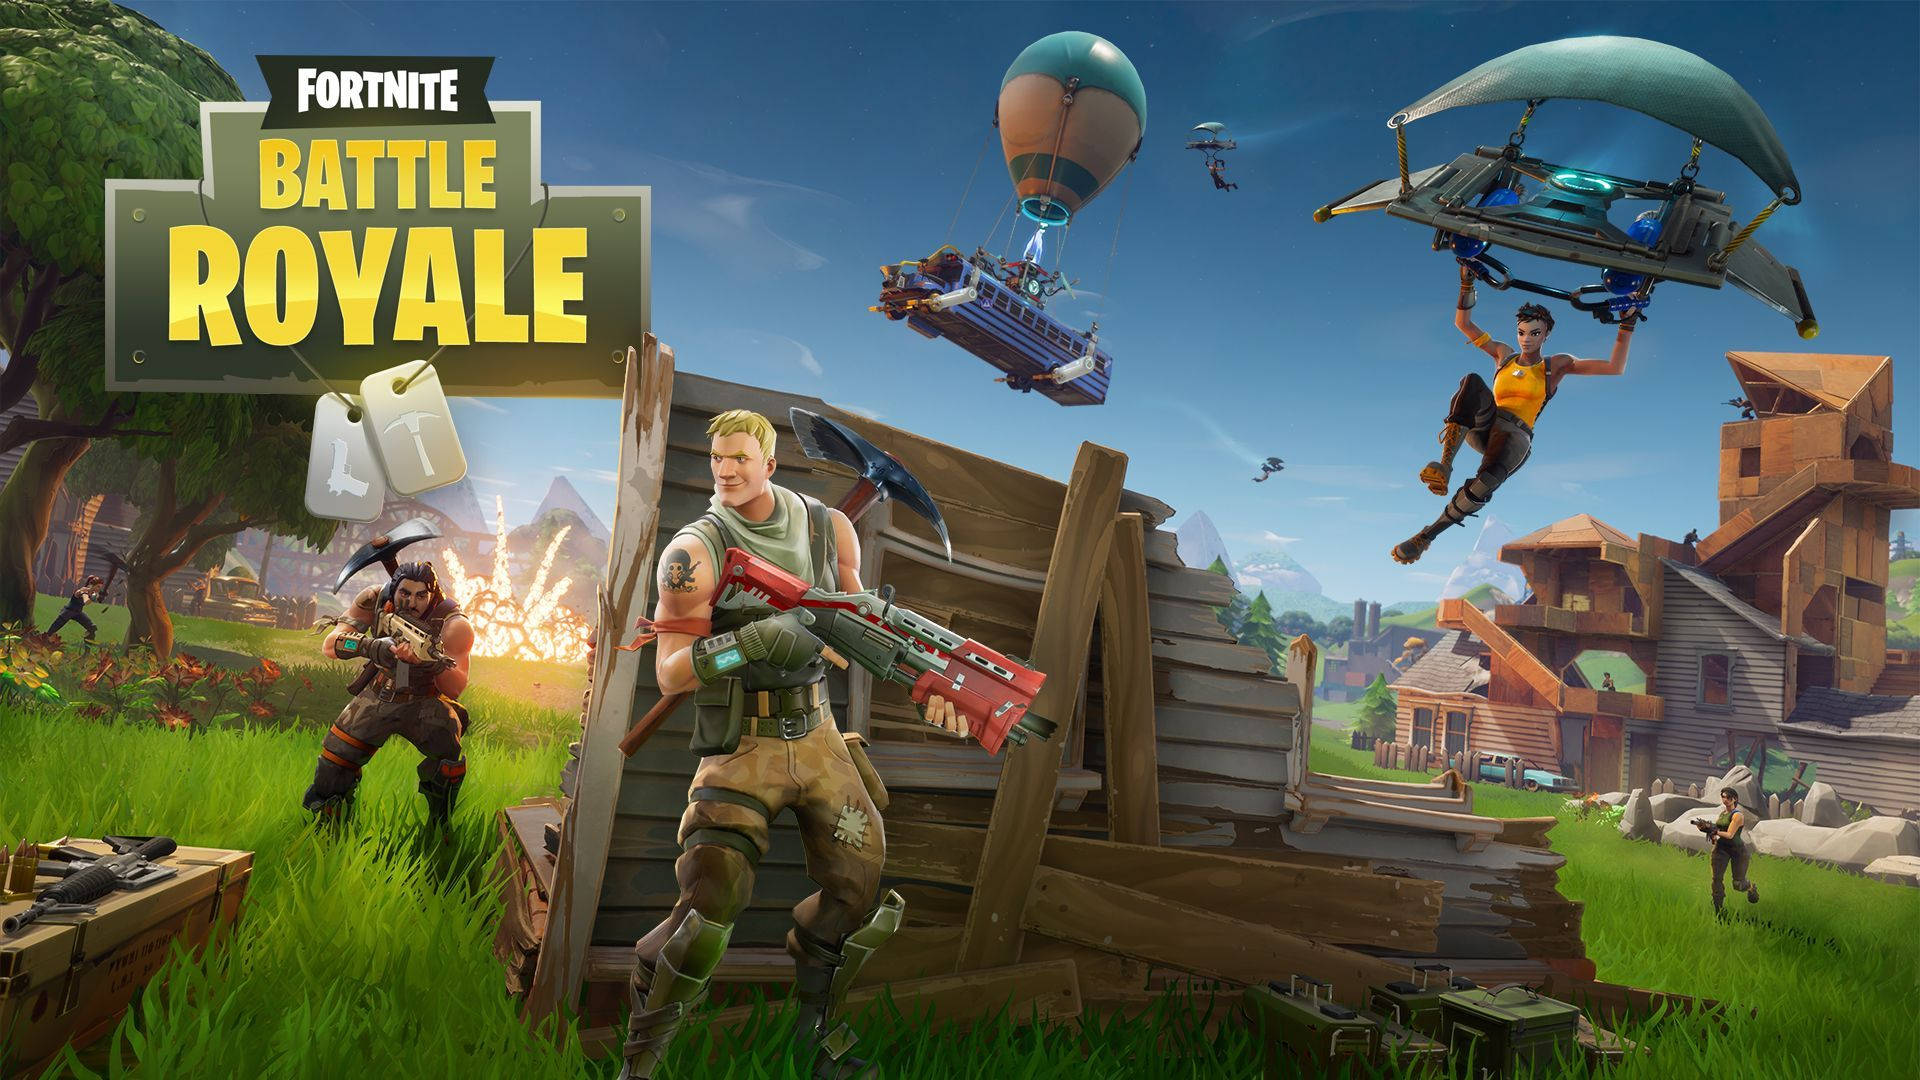 Cool Fortnite Battle Royale Players Fighting Wallpaper